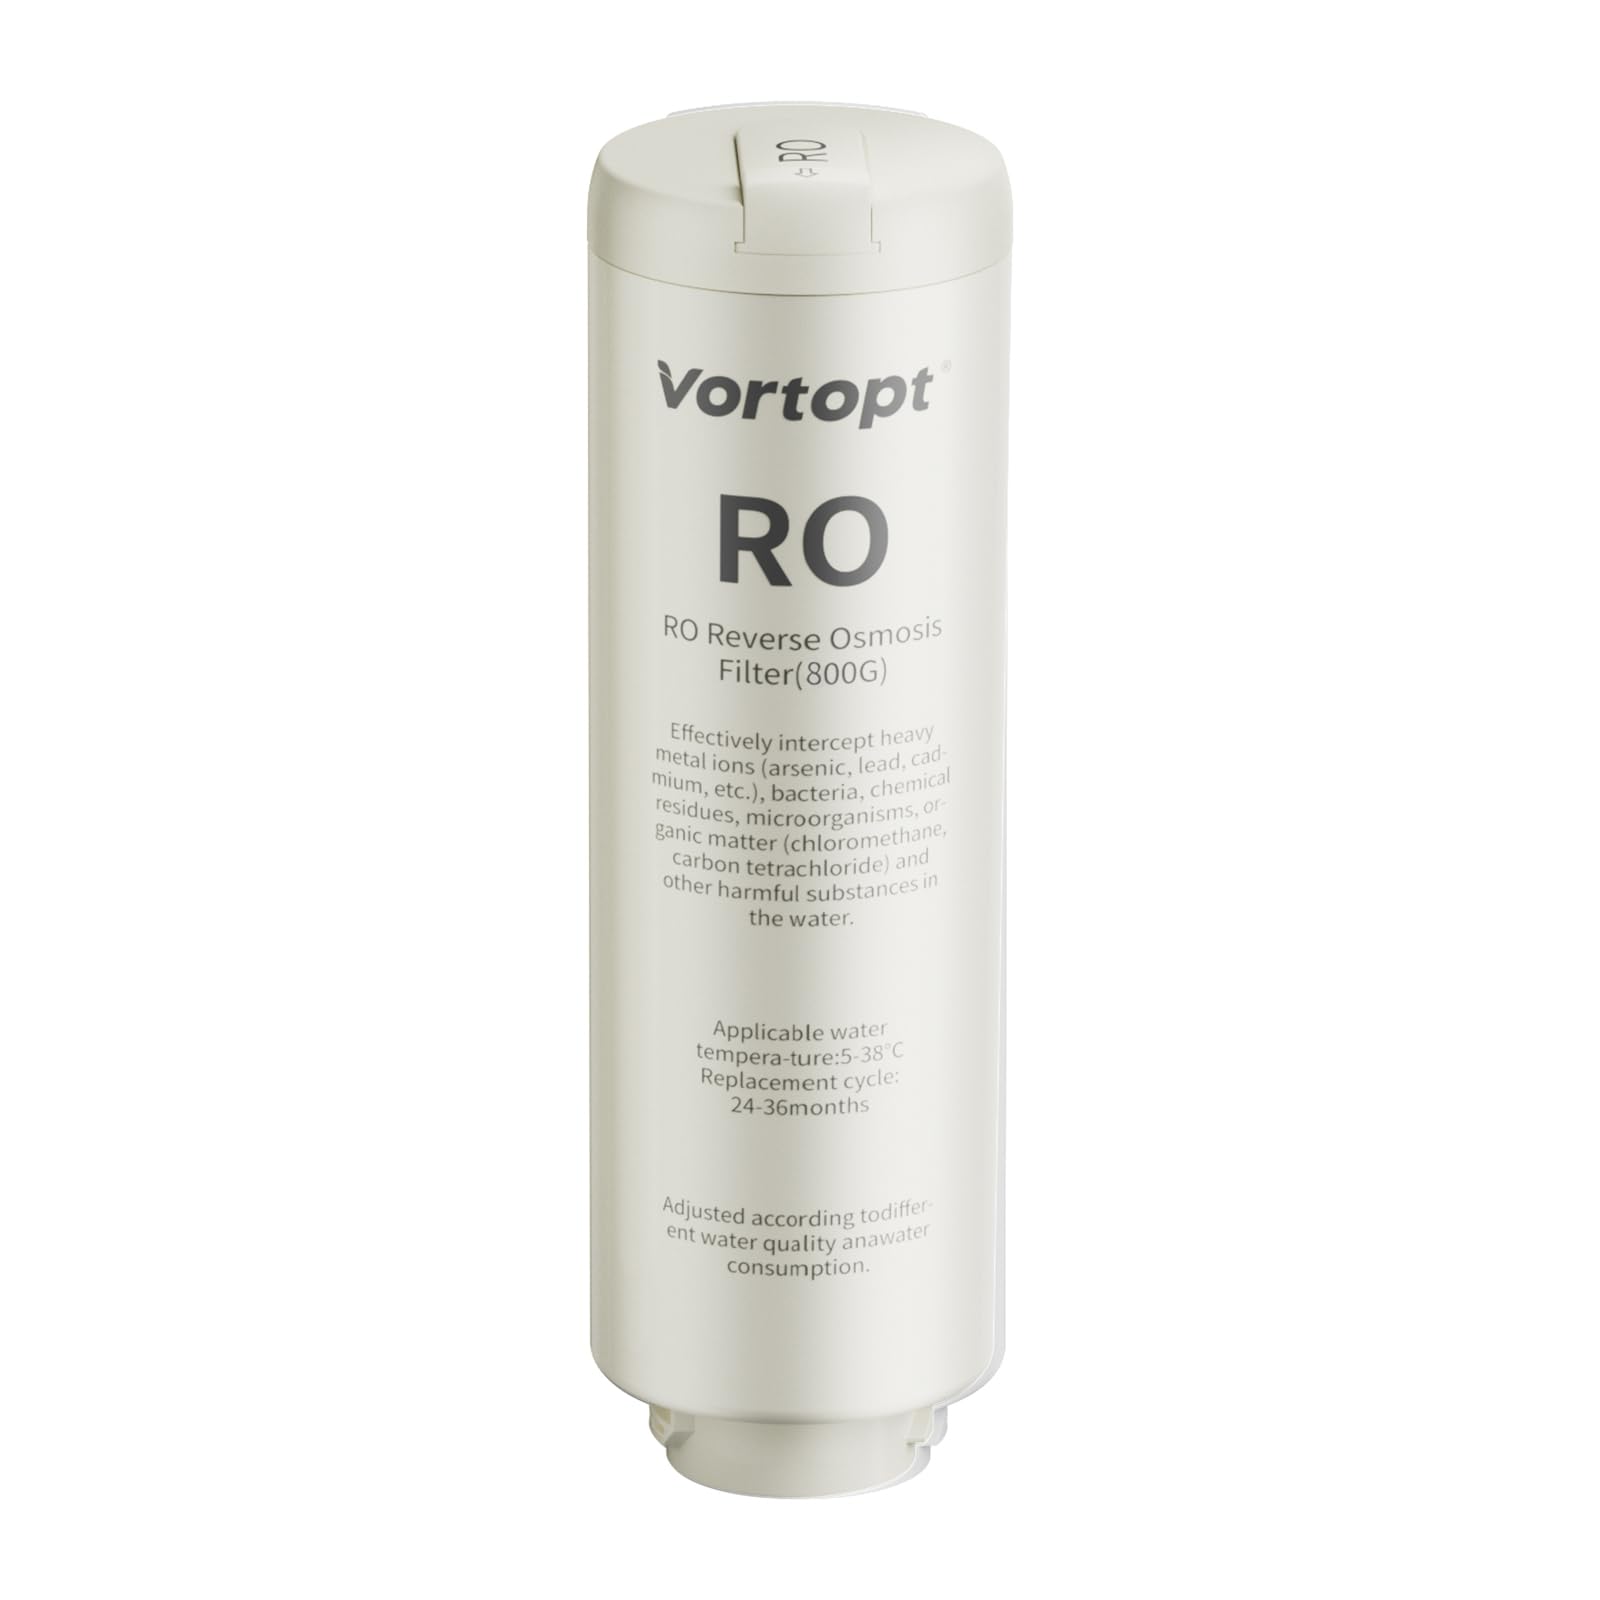 PCB/RO Replacement Filter Compatible with DR4 Reverse Osmosis Water Filter System,Vortopt 